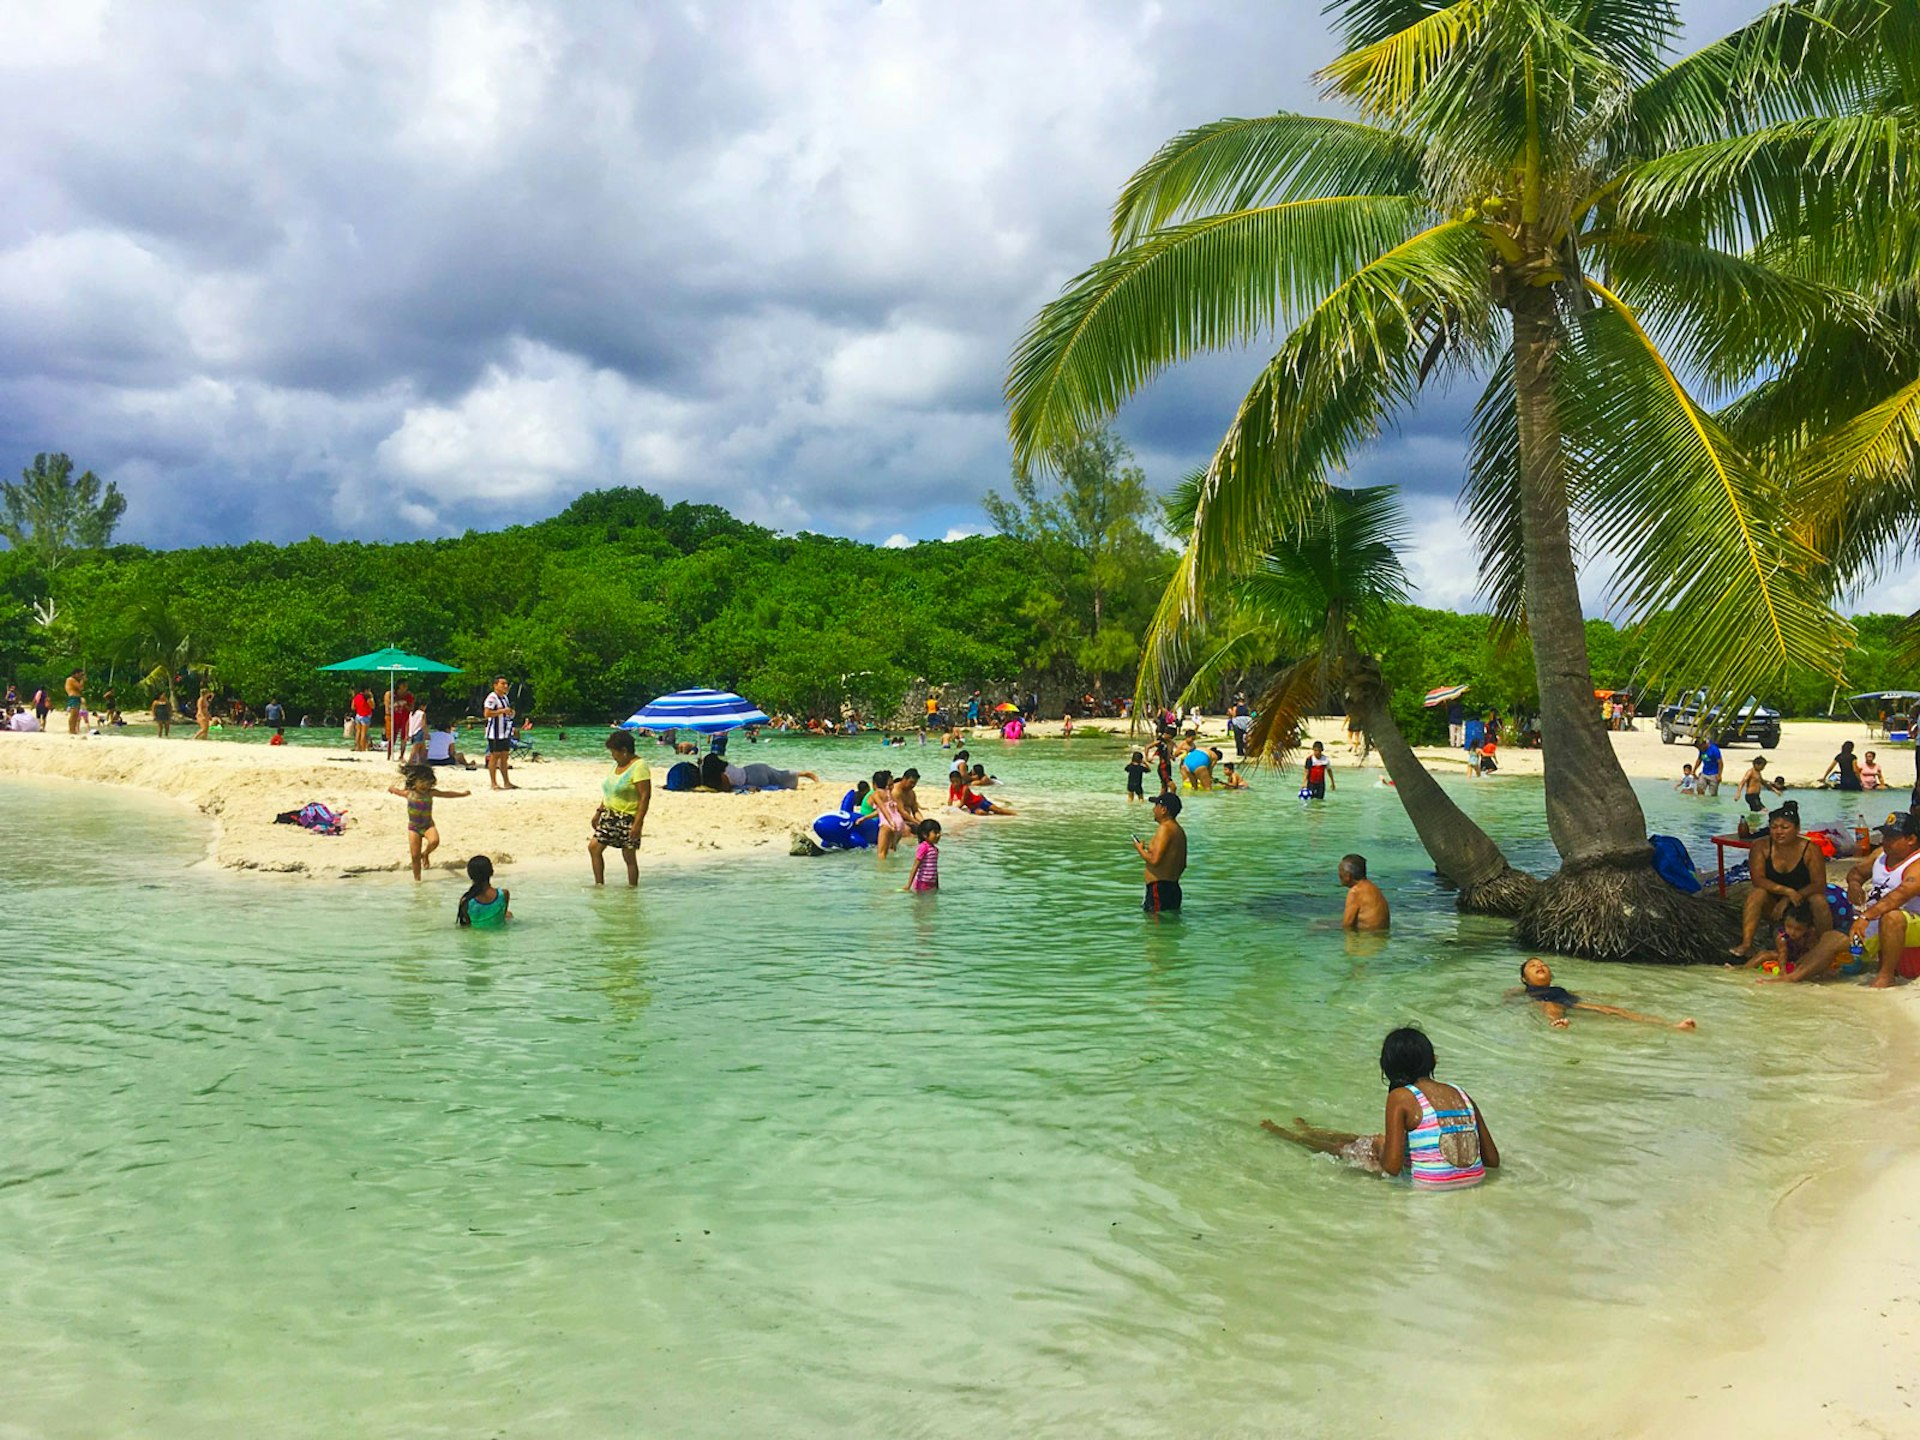 People enjoy the shallow water and white sand beach under palm trees